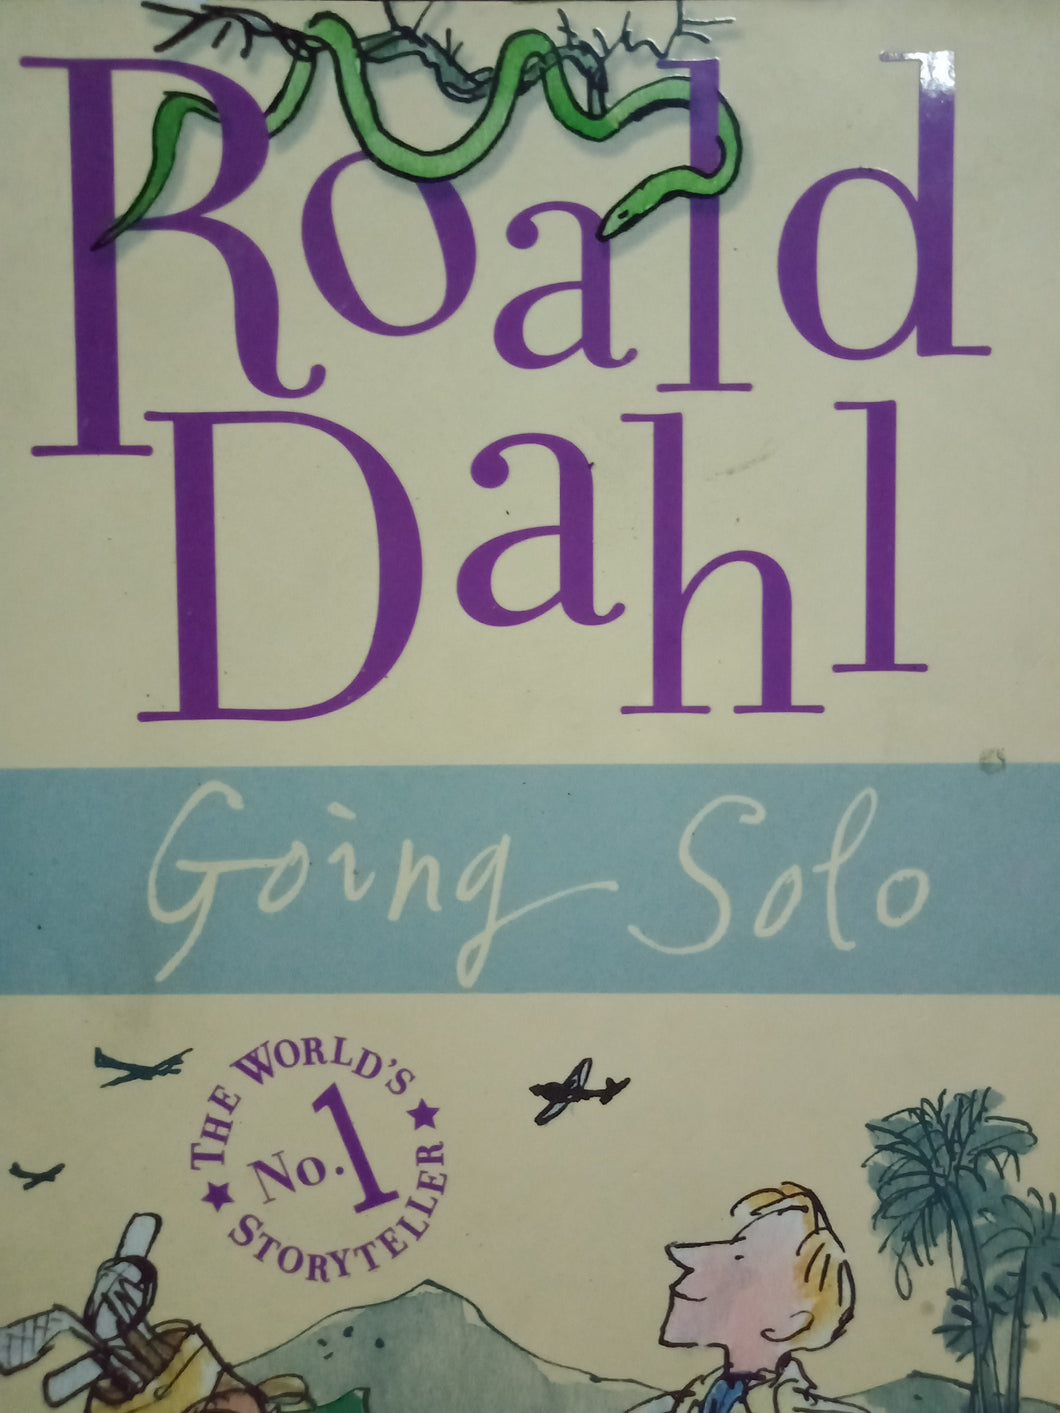 Going Solo by Roald Dahl